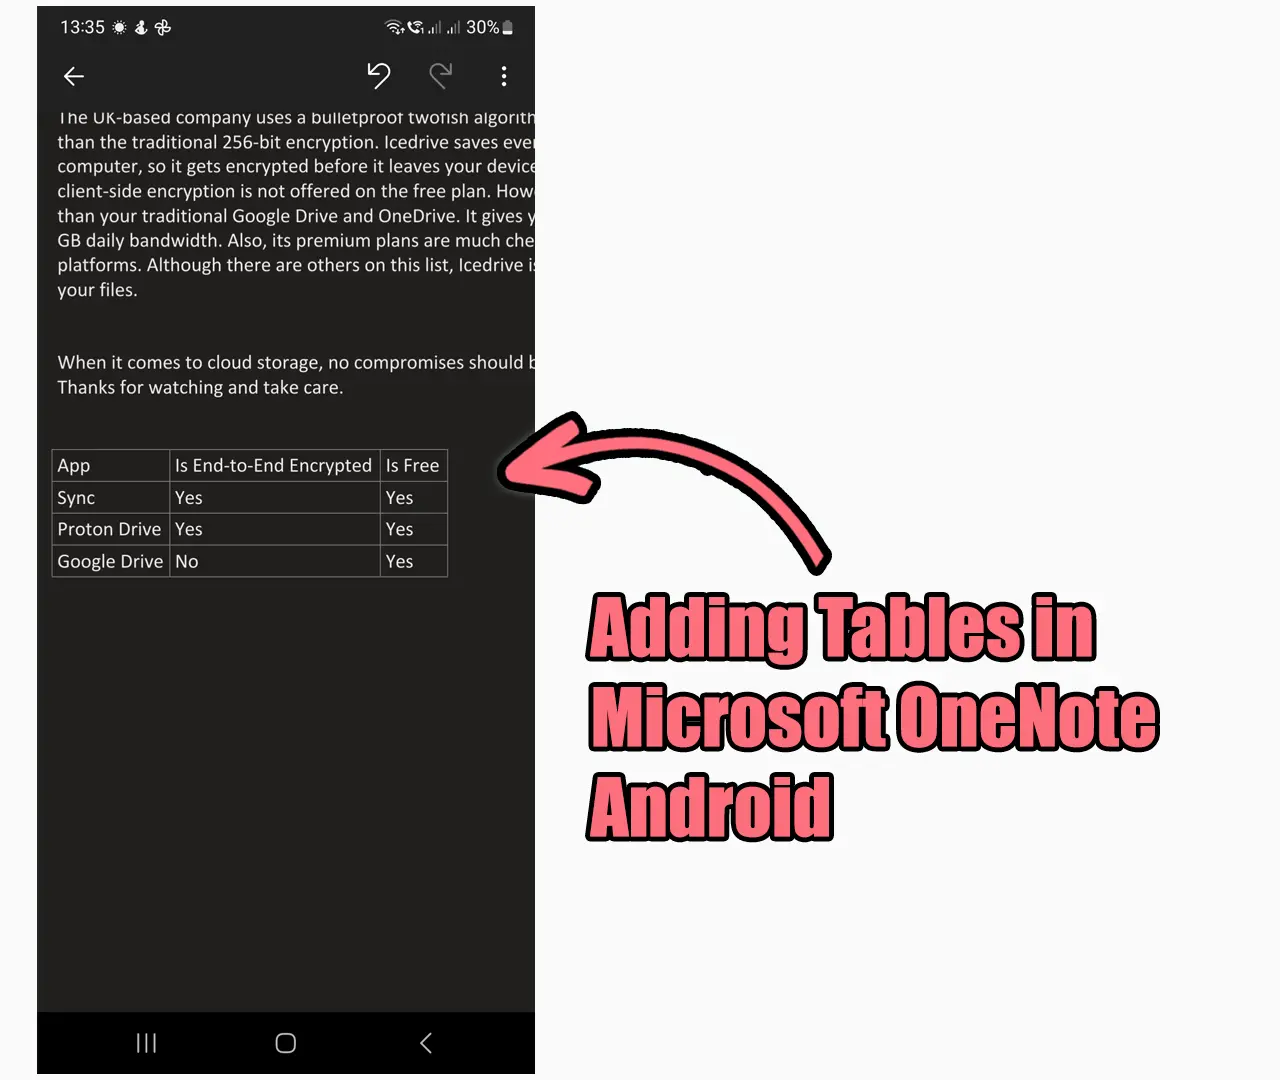 Adding Tables in Microsoft OneNote Android